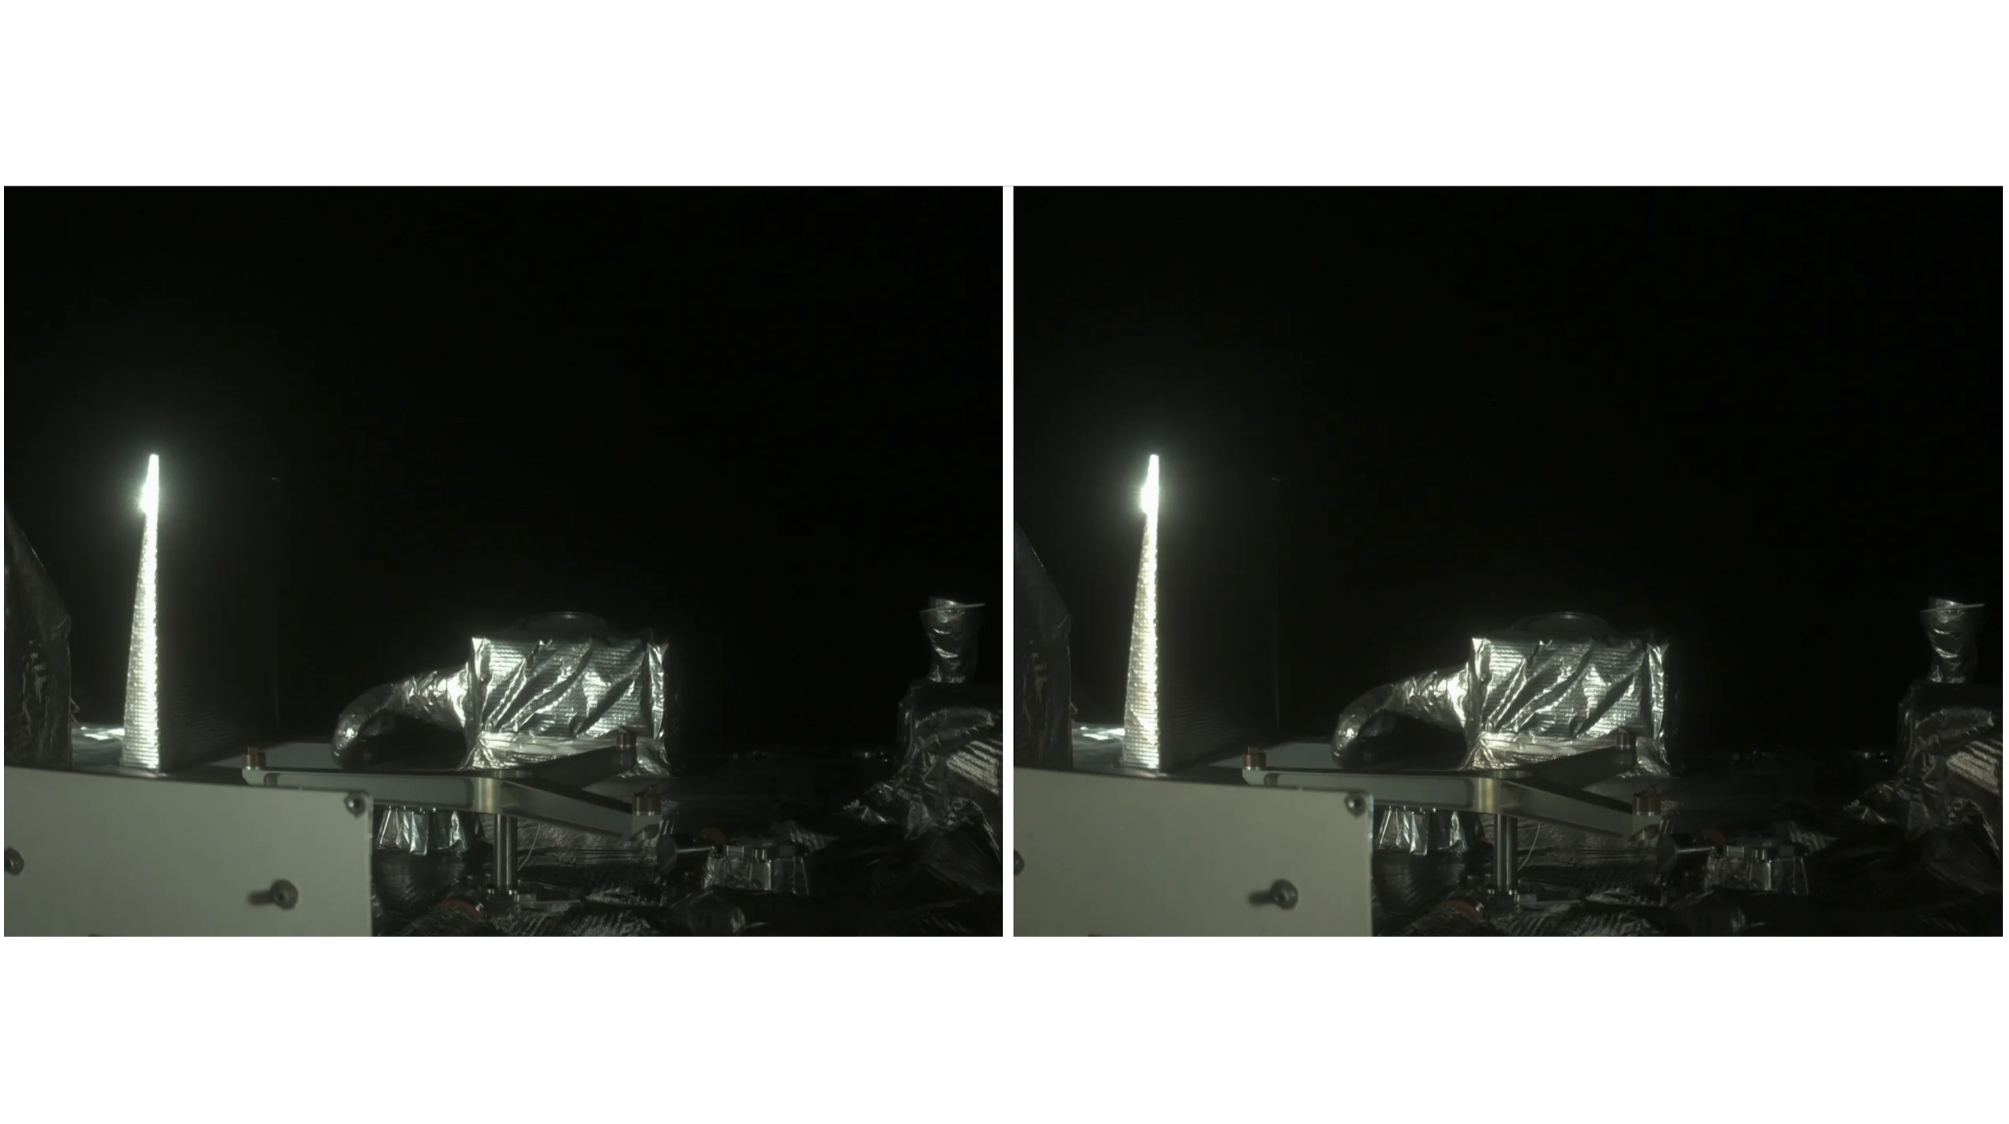 Identical side-by-side images show a close-up view of a shiny silver spacecraft in space.